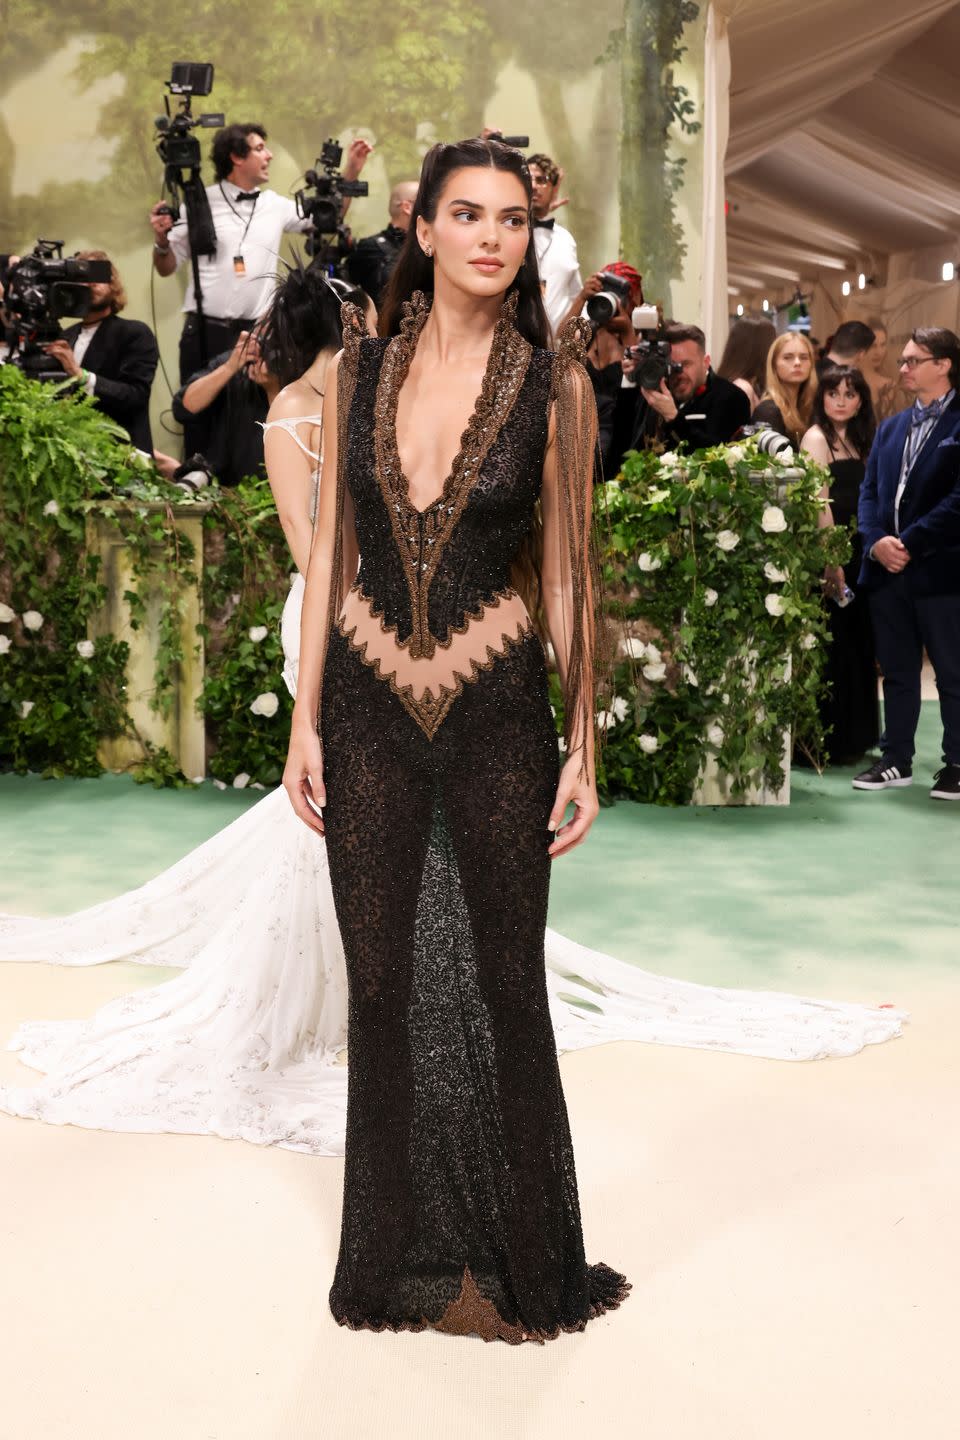 Kendall Jenner’s Givenchy Dress Includes a Very Risqué Back Cutout at ...